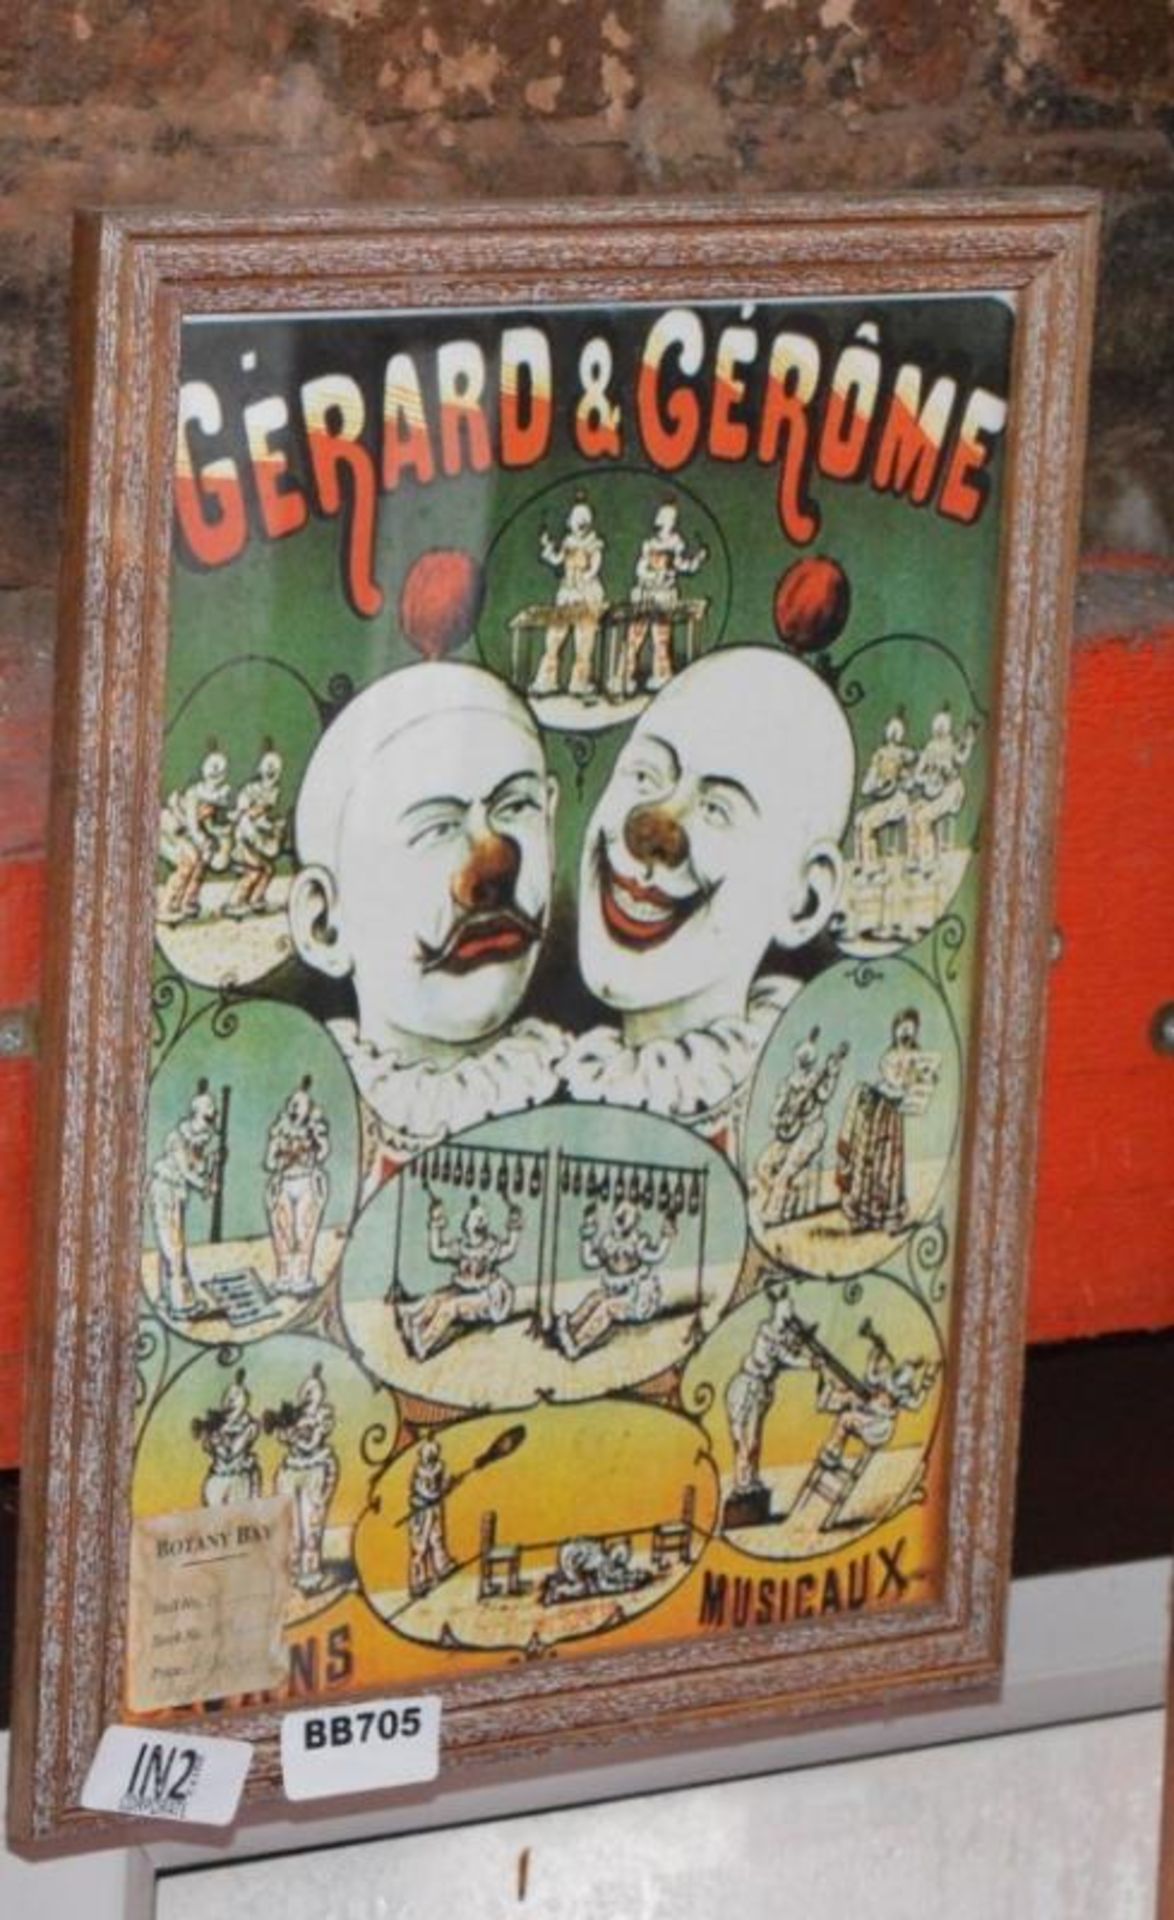 1 x Framed Circus Picture - Gerard & Gerome - 16 x 12 Inch - Ref BB705 - CL351 - Location: Chorley P - Image 3 of 3